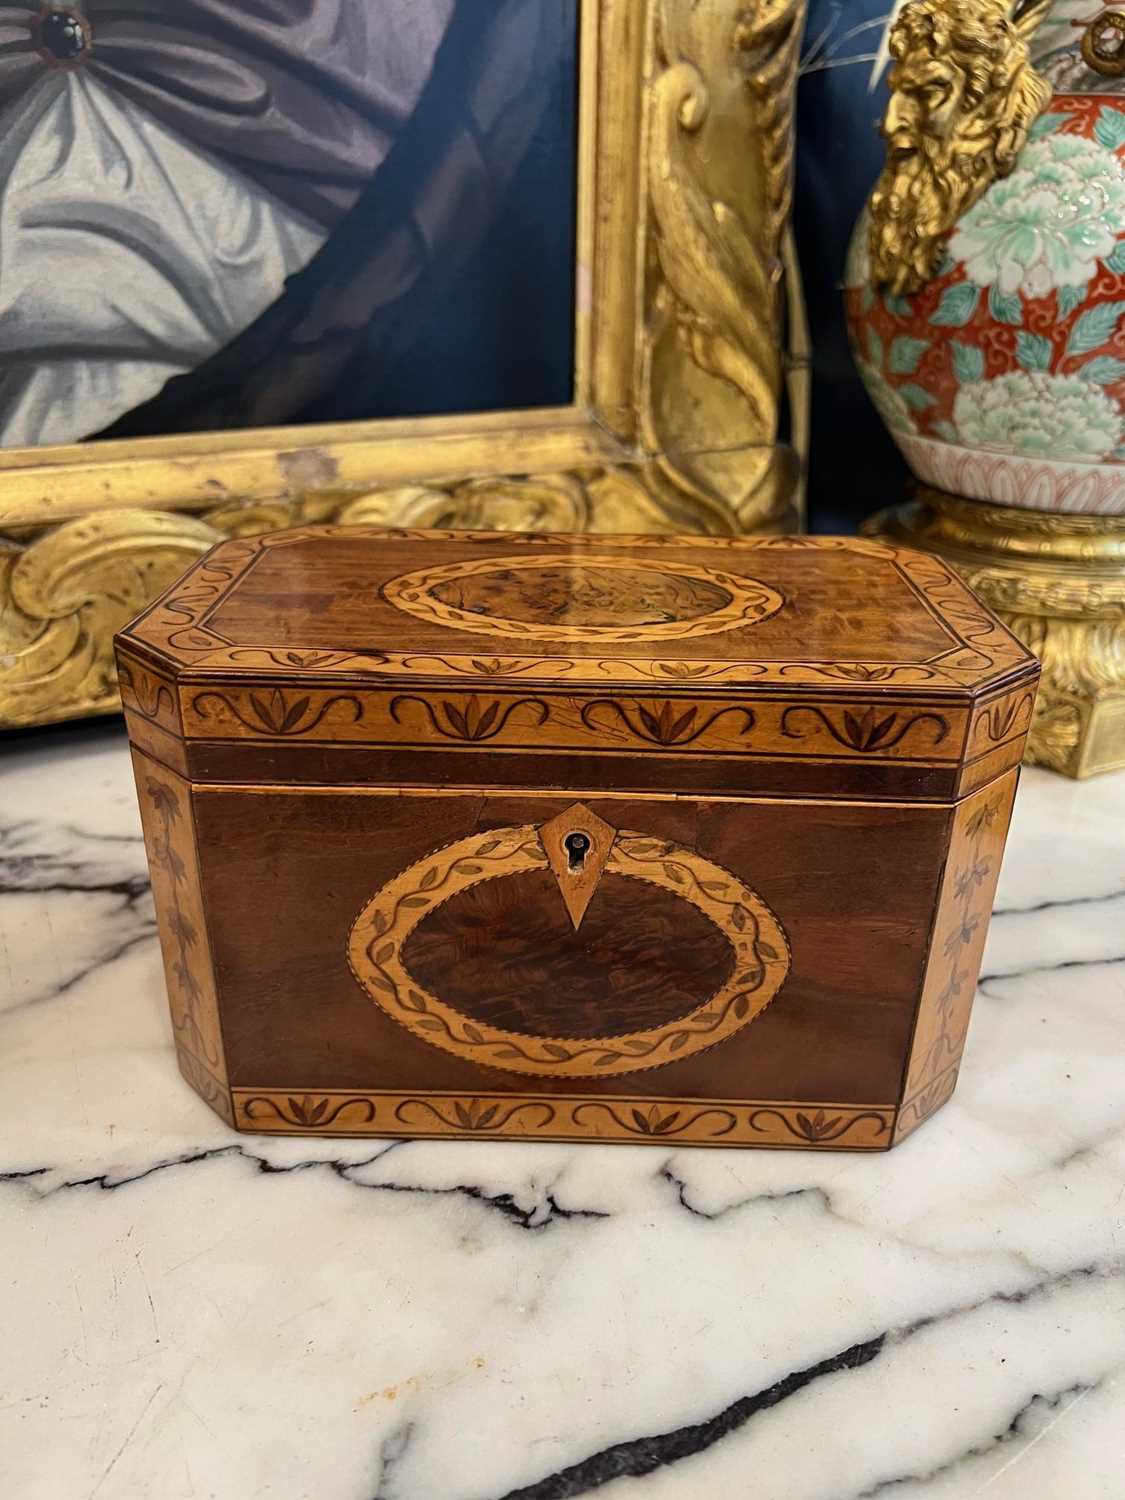 A FINE LATE 18TH / EARLY 19TH CENTURY INLAID SATINWOOD TEA CADDY - Image 7 of 7